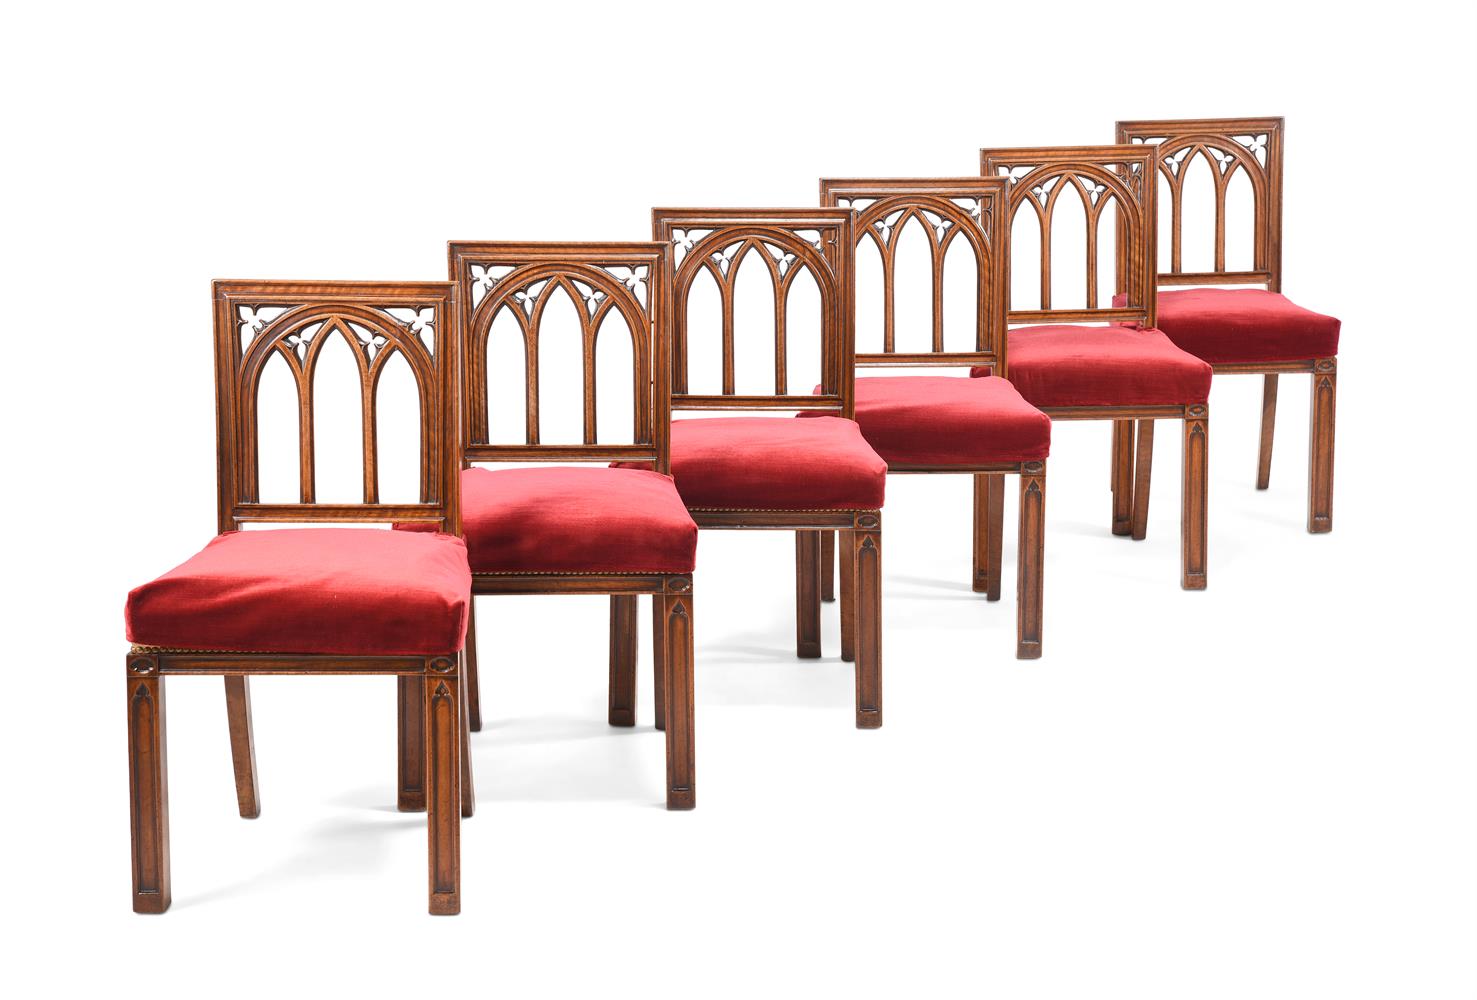 A SET OF SIX WALNUT DINING CHAIRS, IN GOTHIC REVIVAL STYLE, FIRST HALF 19TH CENTURY - Image 3 of 5